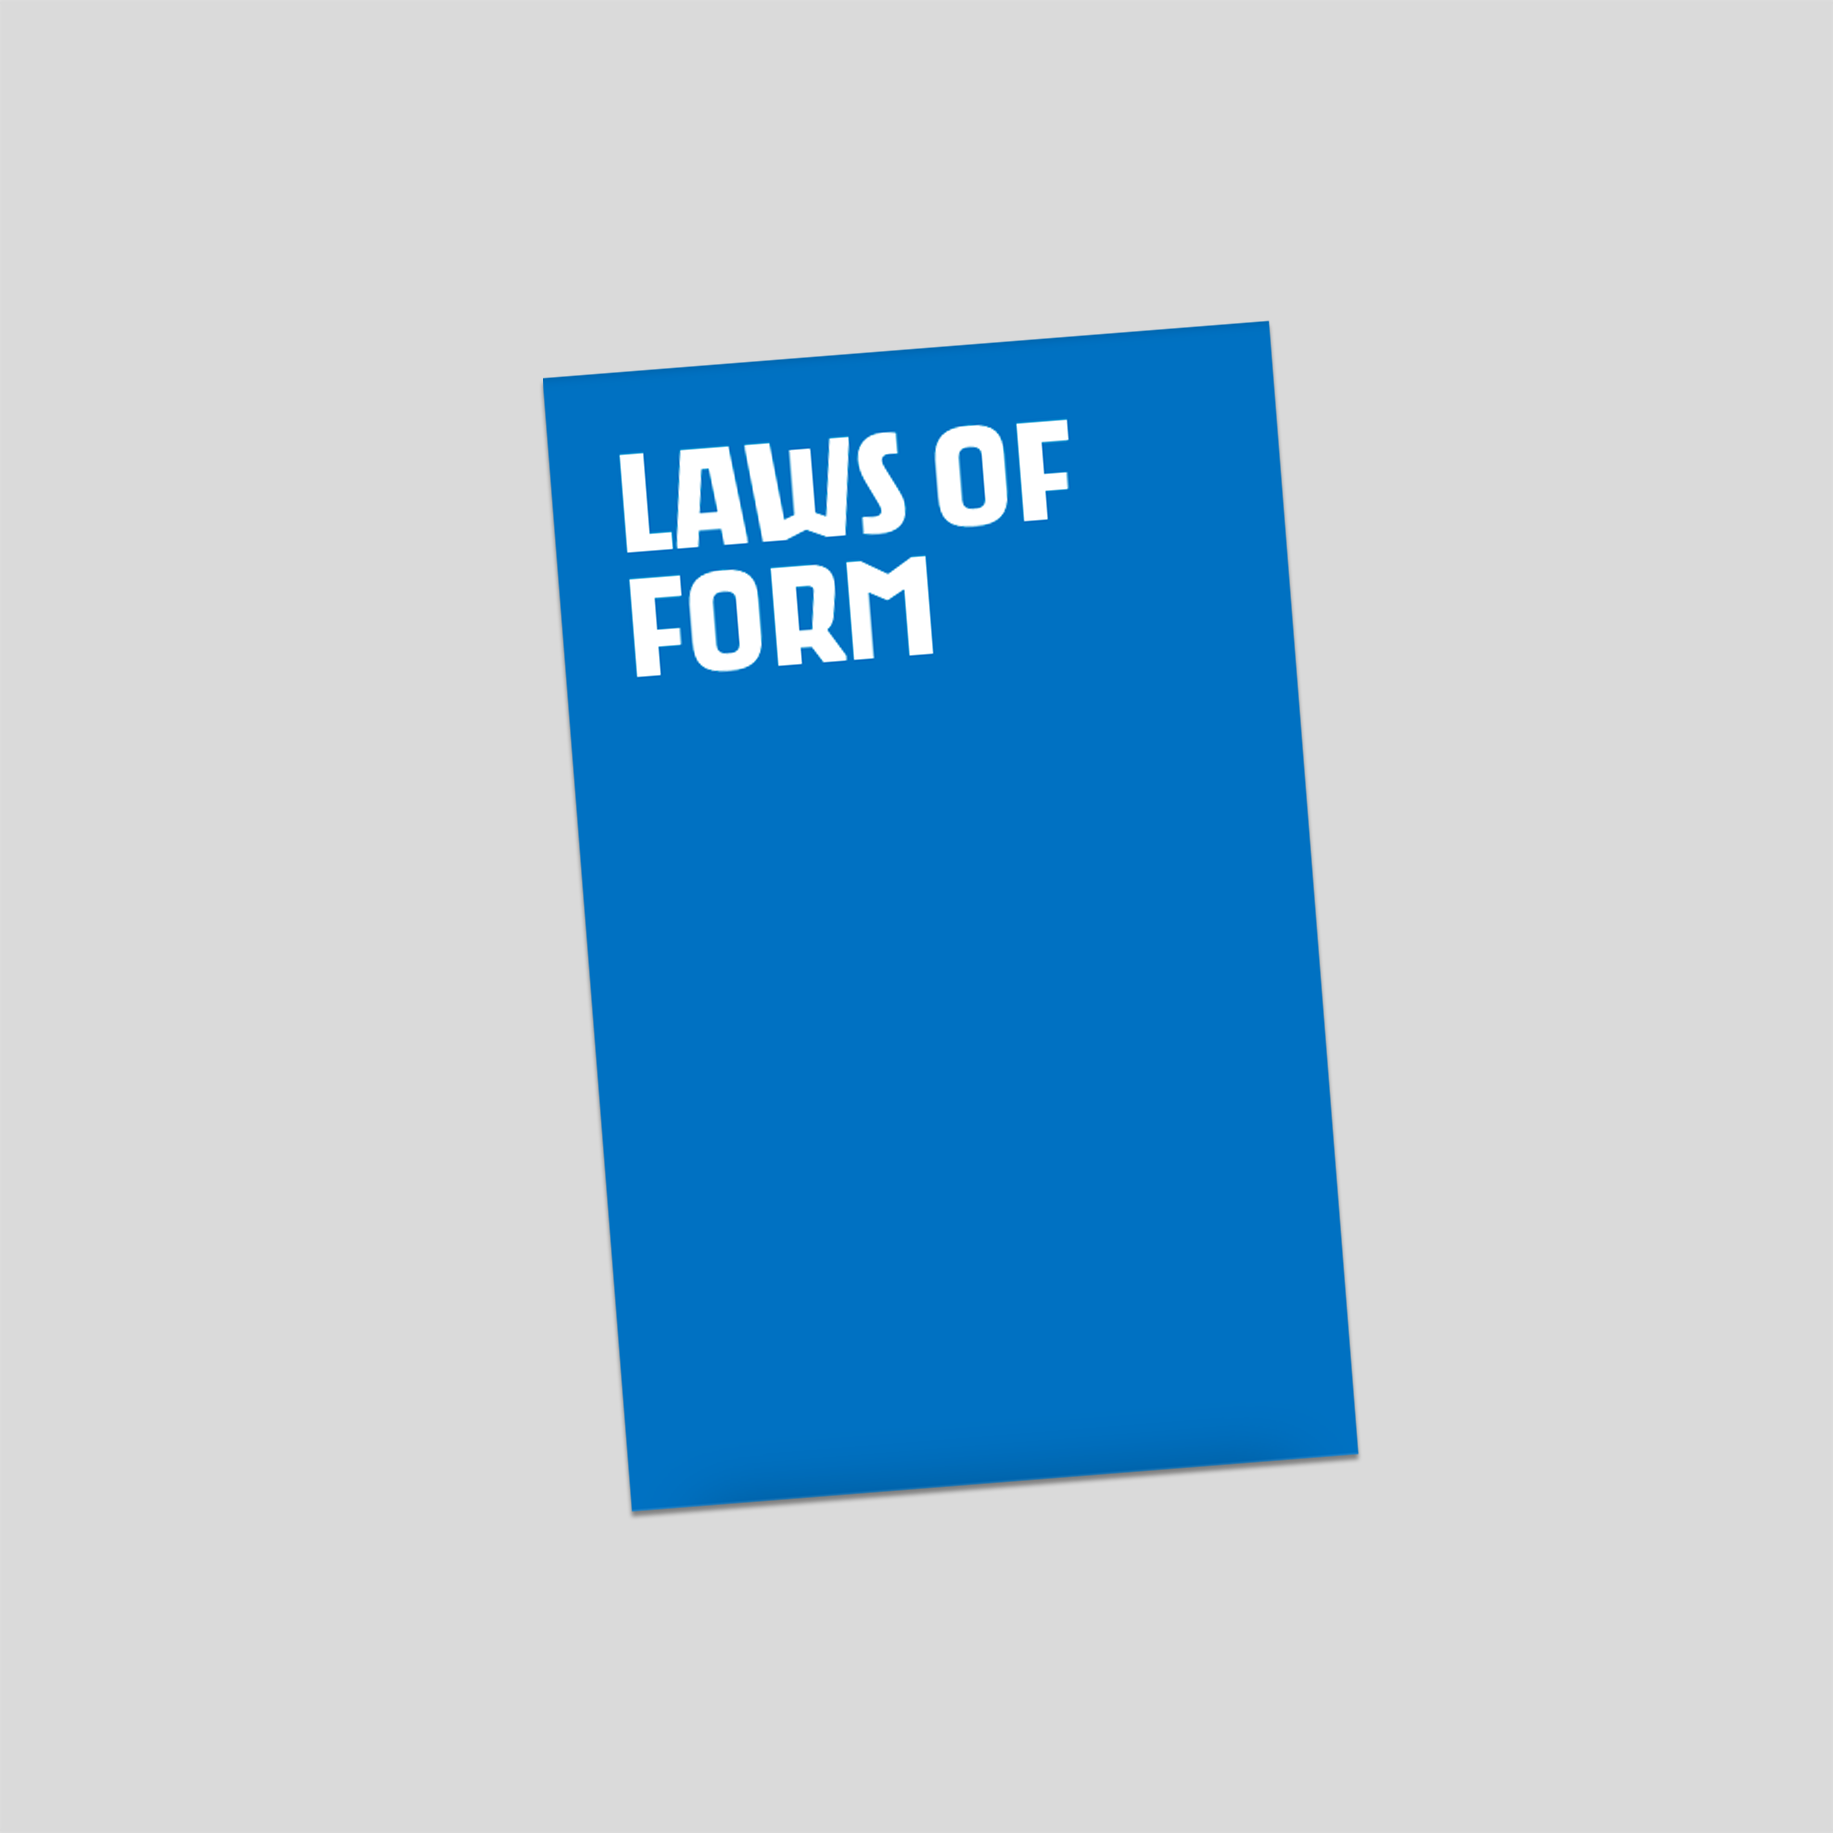 Laws of form